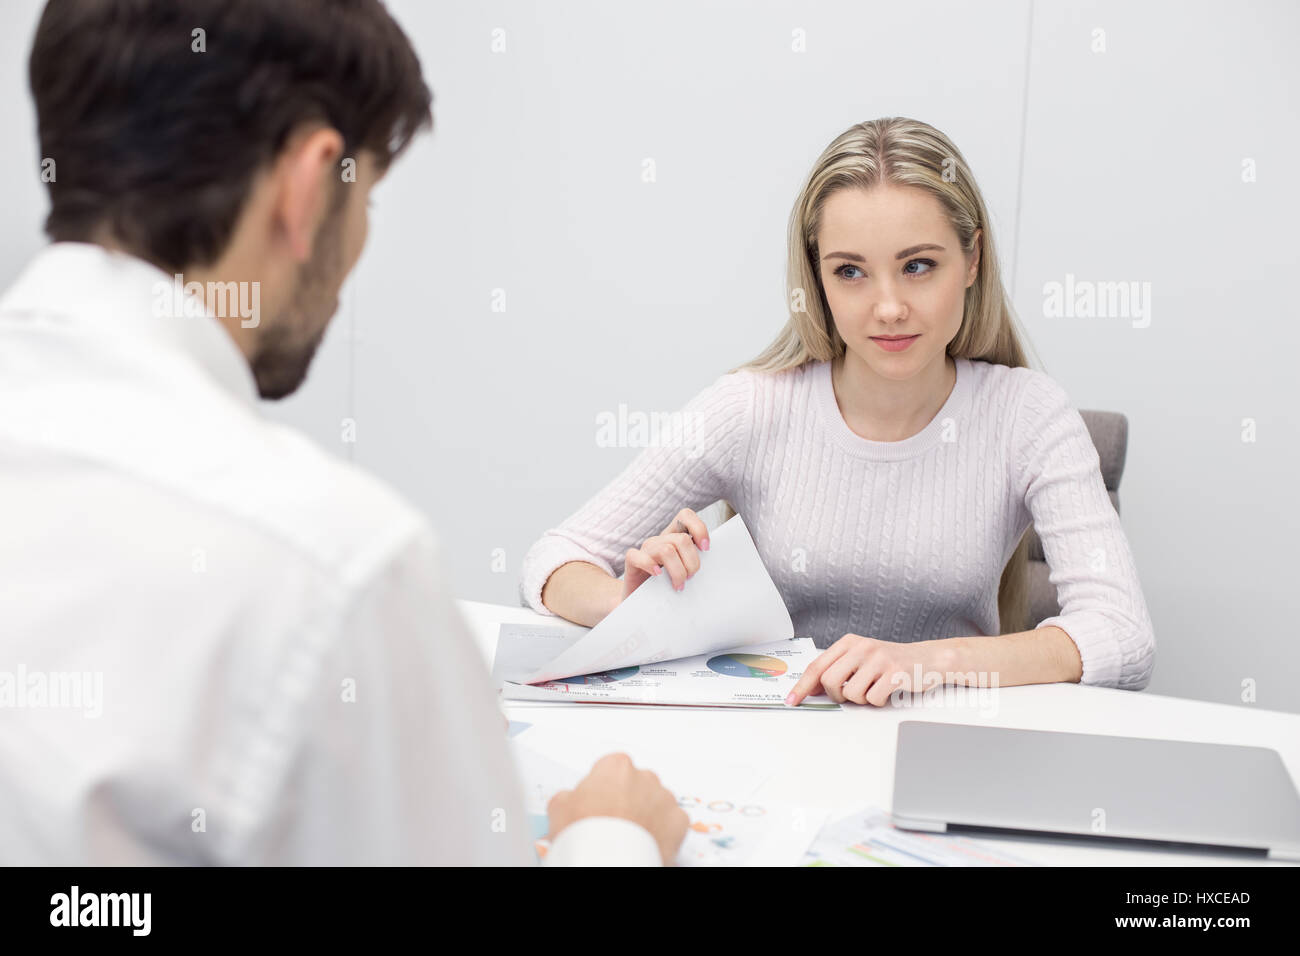 People Interview Job Application Concept Stock Photo